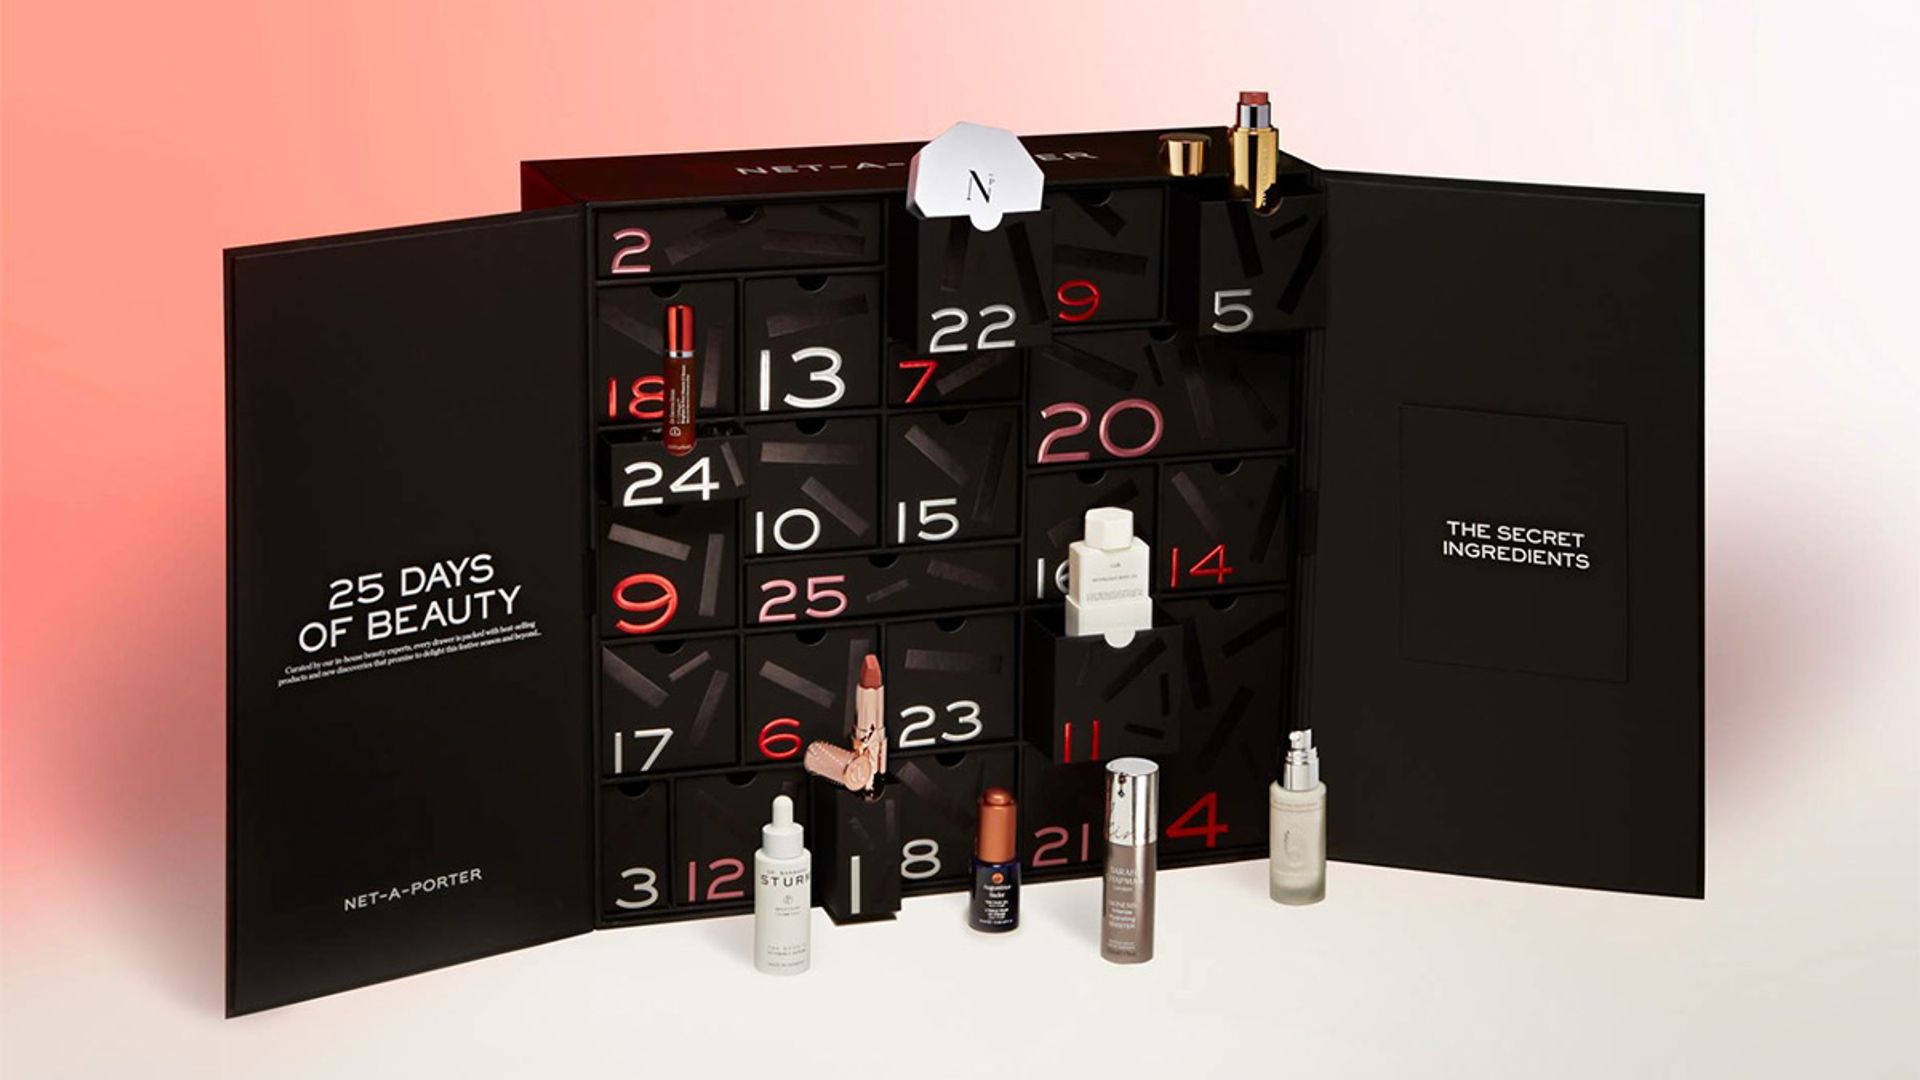 The Net-a-Porter advent calendar 2022 is a beauty - and its now on sale